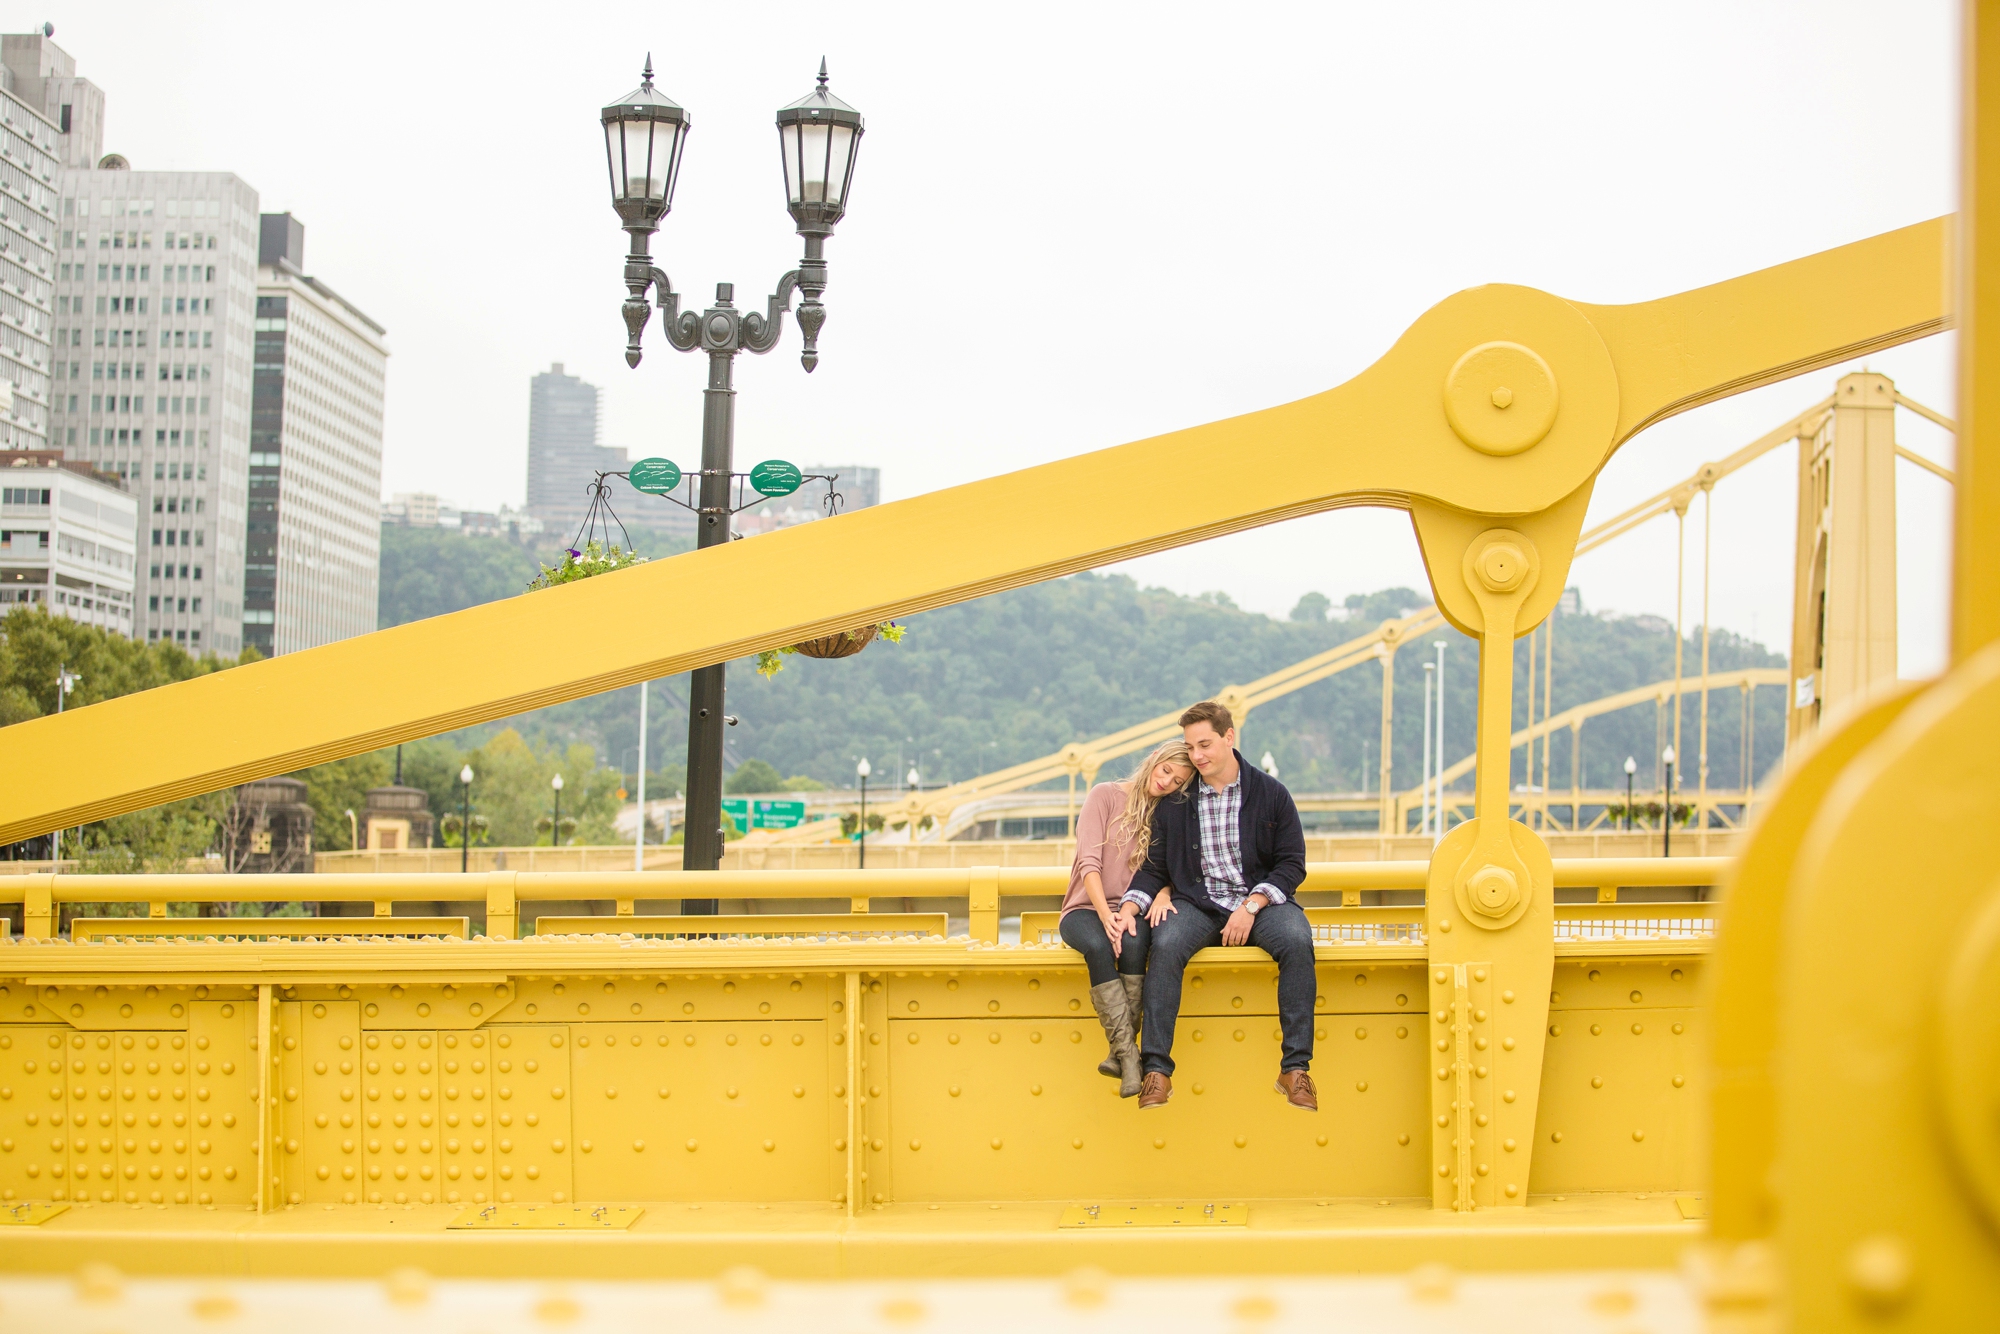 pittsburgh wedding photographer, pittsburgh engagement photos, best spot in pittsburgh for photo shoot, north shore engagement pictures, downtown pittsburgh engagement photos